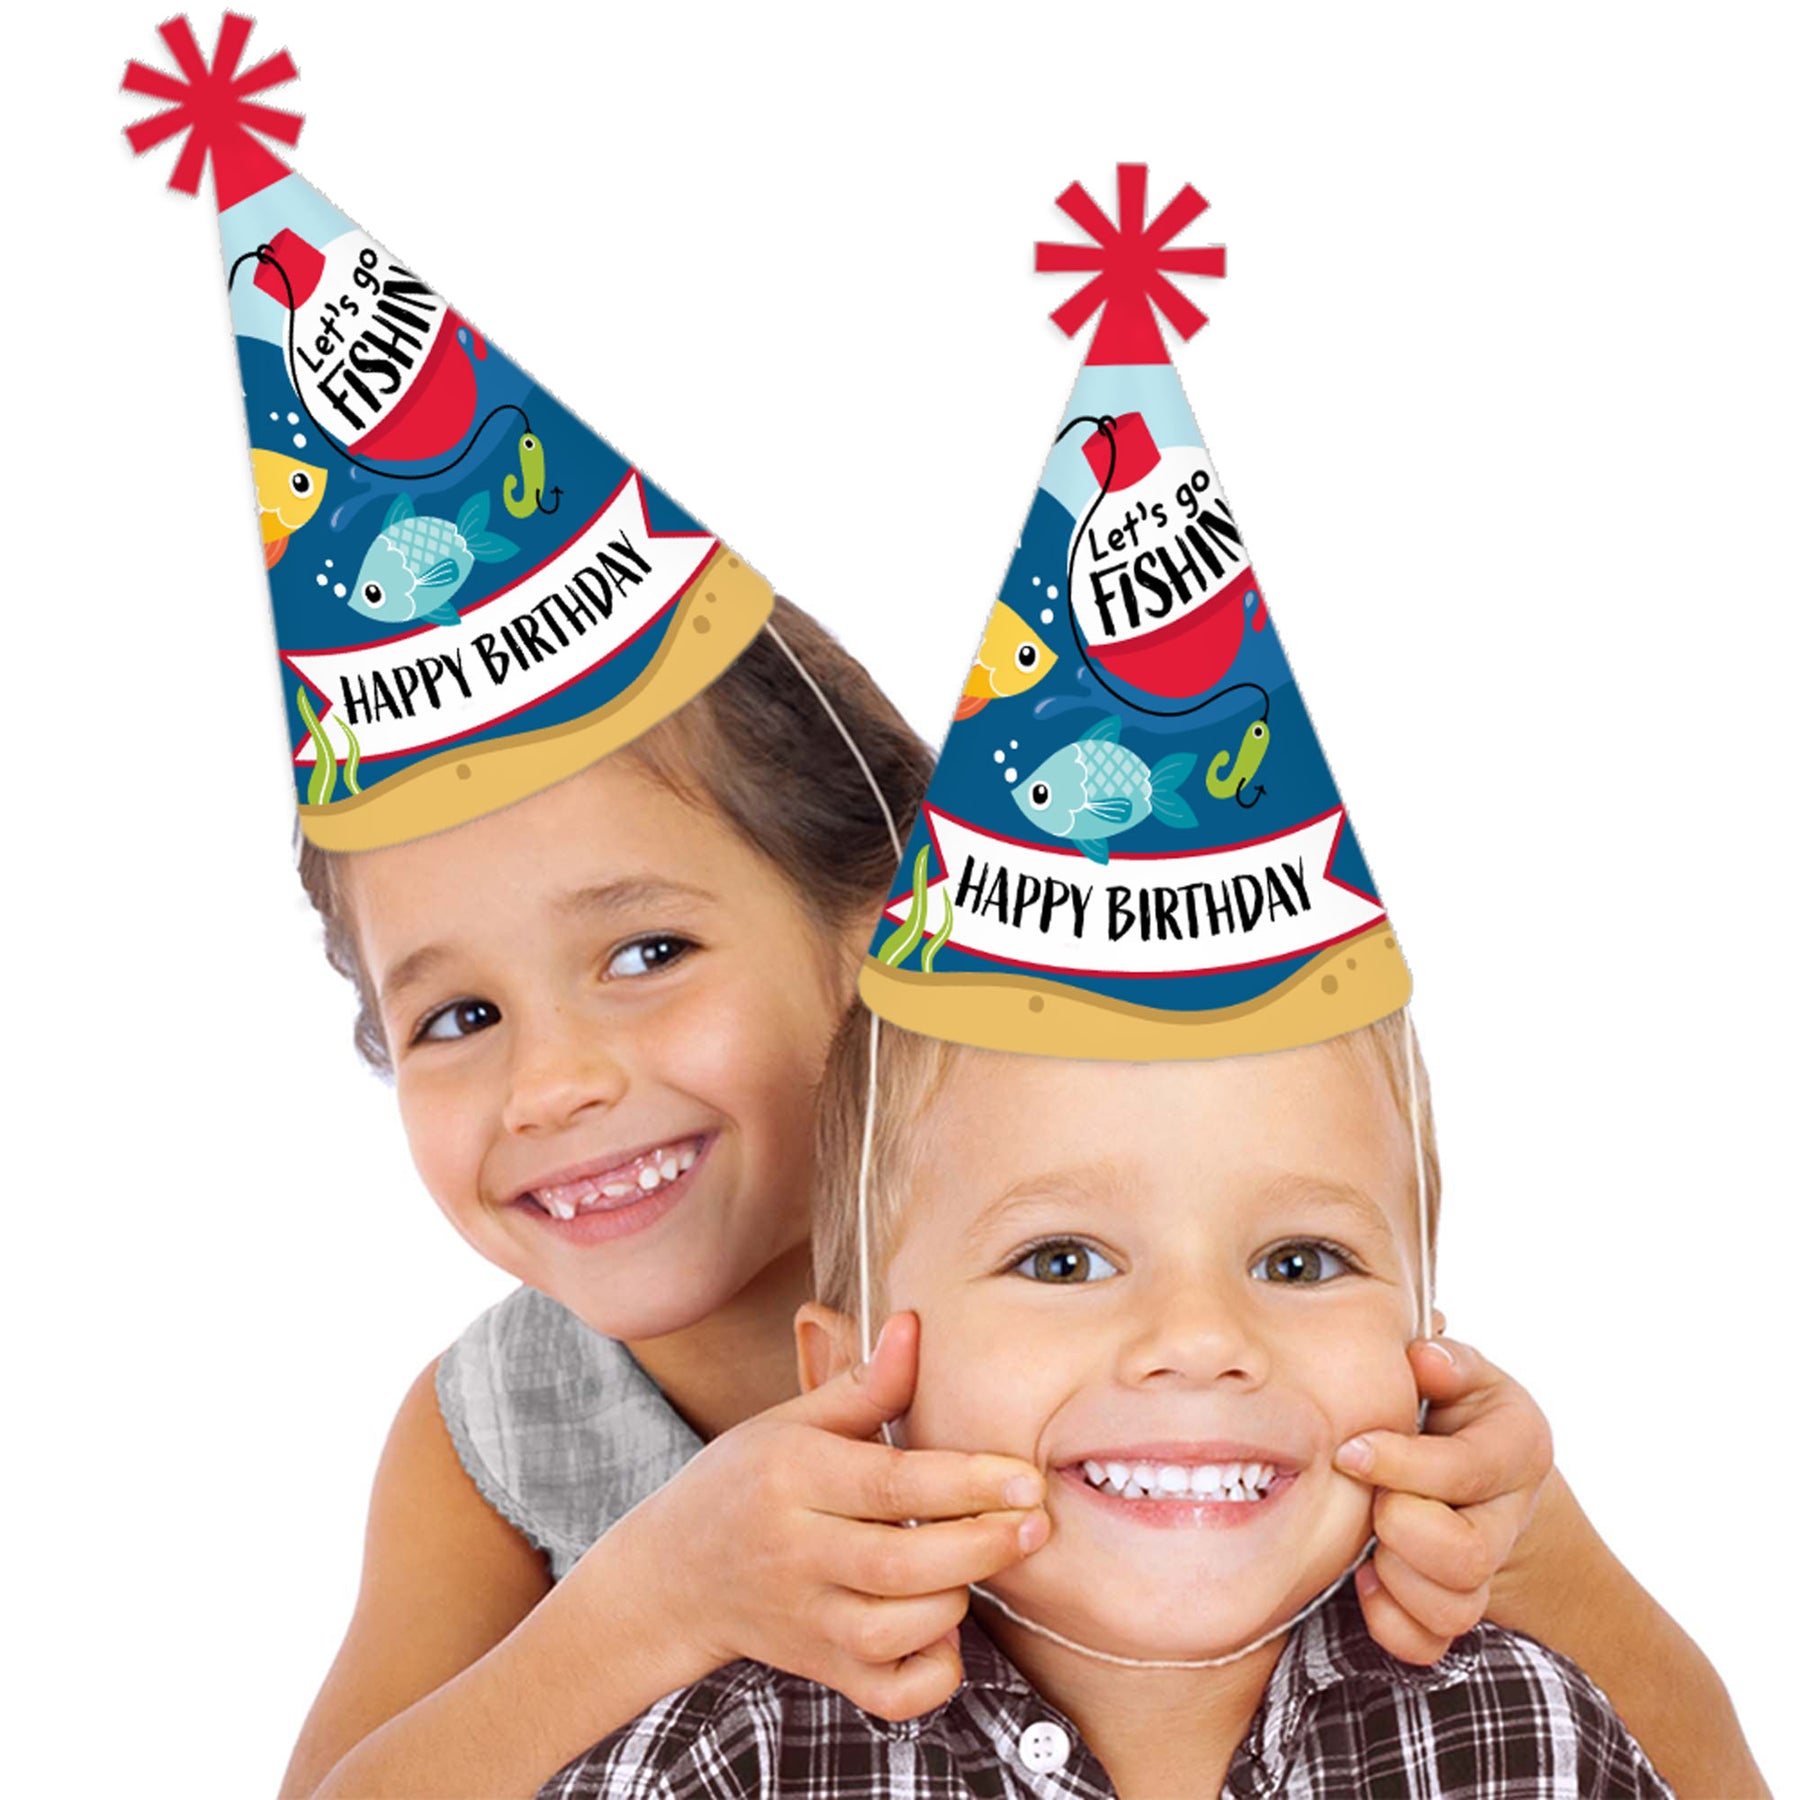 Let's Go Fishing - Cone Happy Birthday Party Hats for Kids and